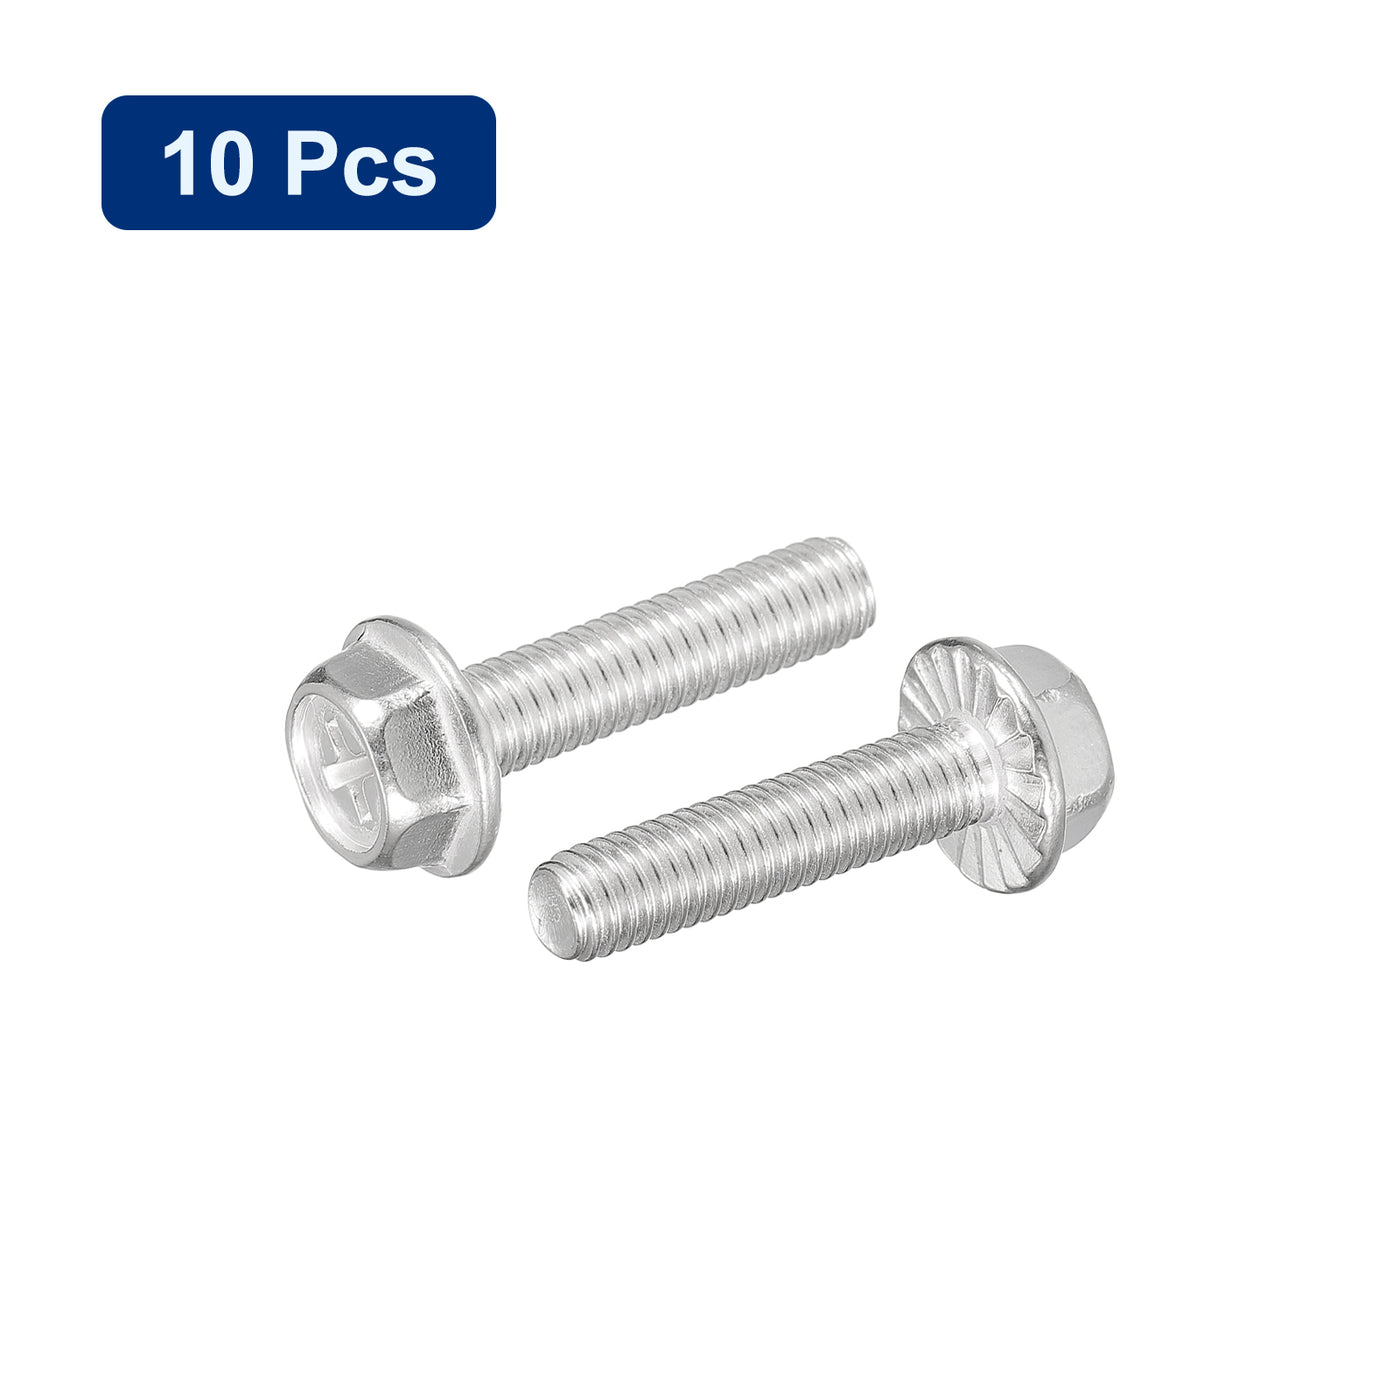 uxcell Uxcell M6x25mm Phillips Hex Head Flange Bolts, 10pcs 304 Stainless Steel Screws